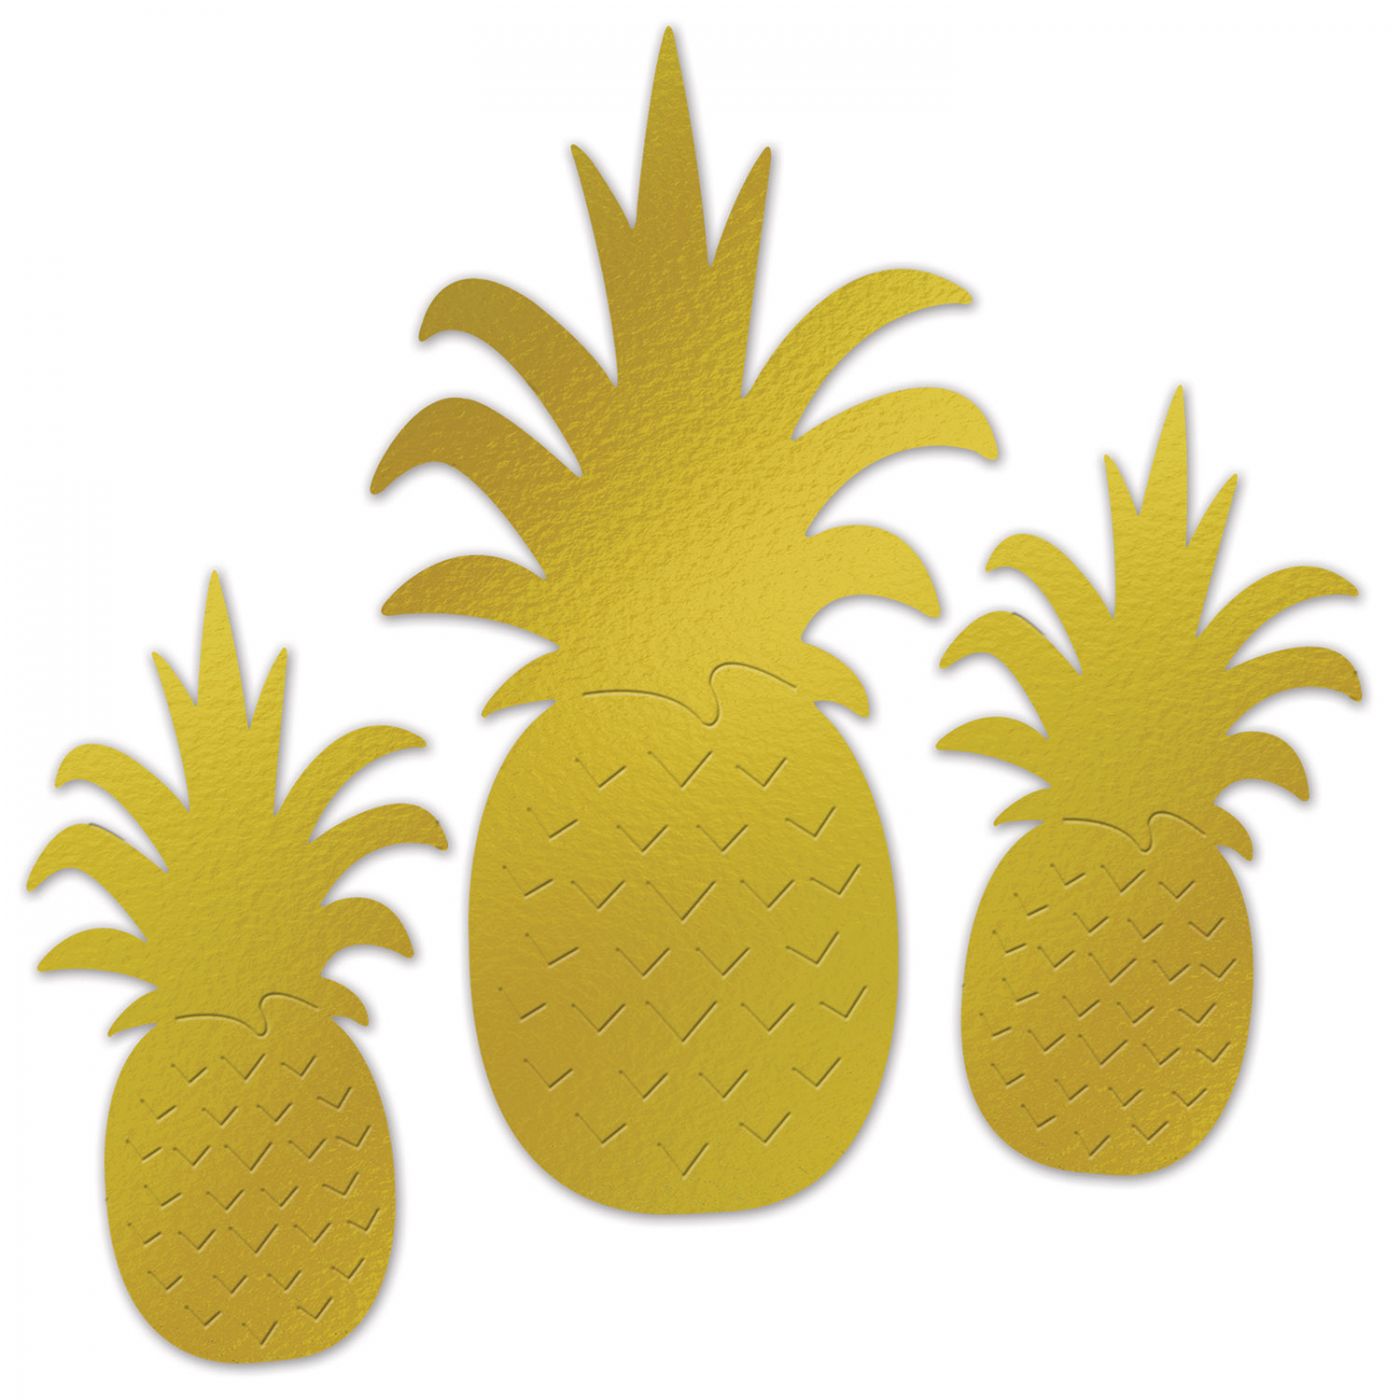 Foil Pineapple Silhouettes (12) image